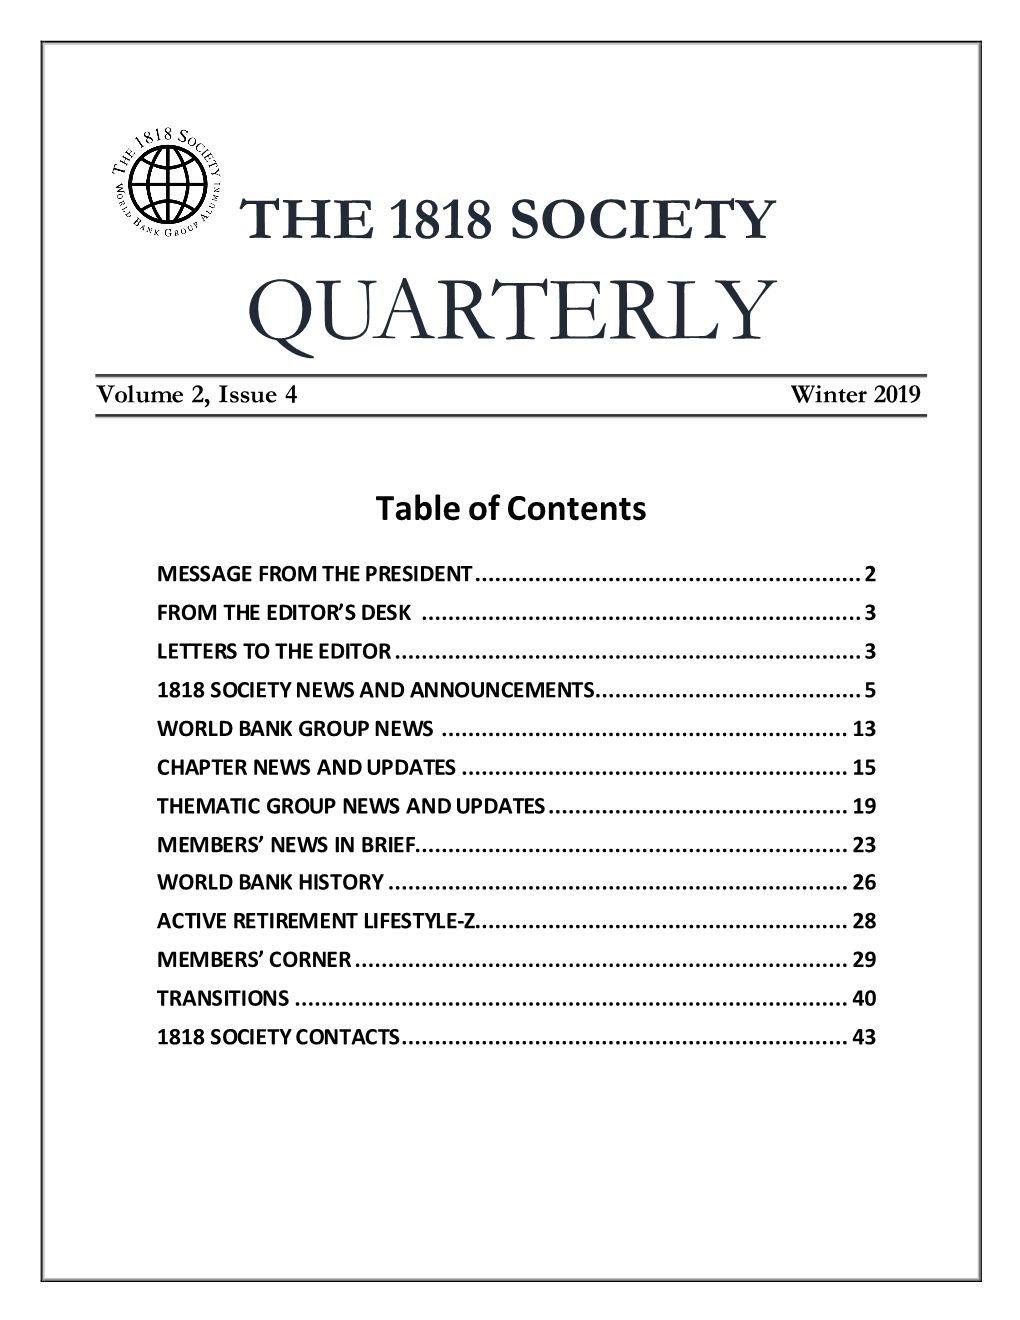 THE 1818 SOCIETY QUARTERLY Volume 2, Issue 4 Winter 2019